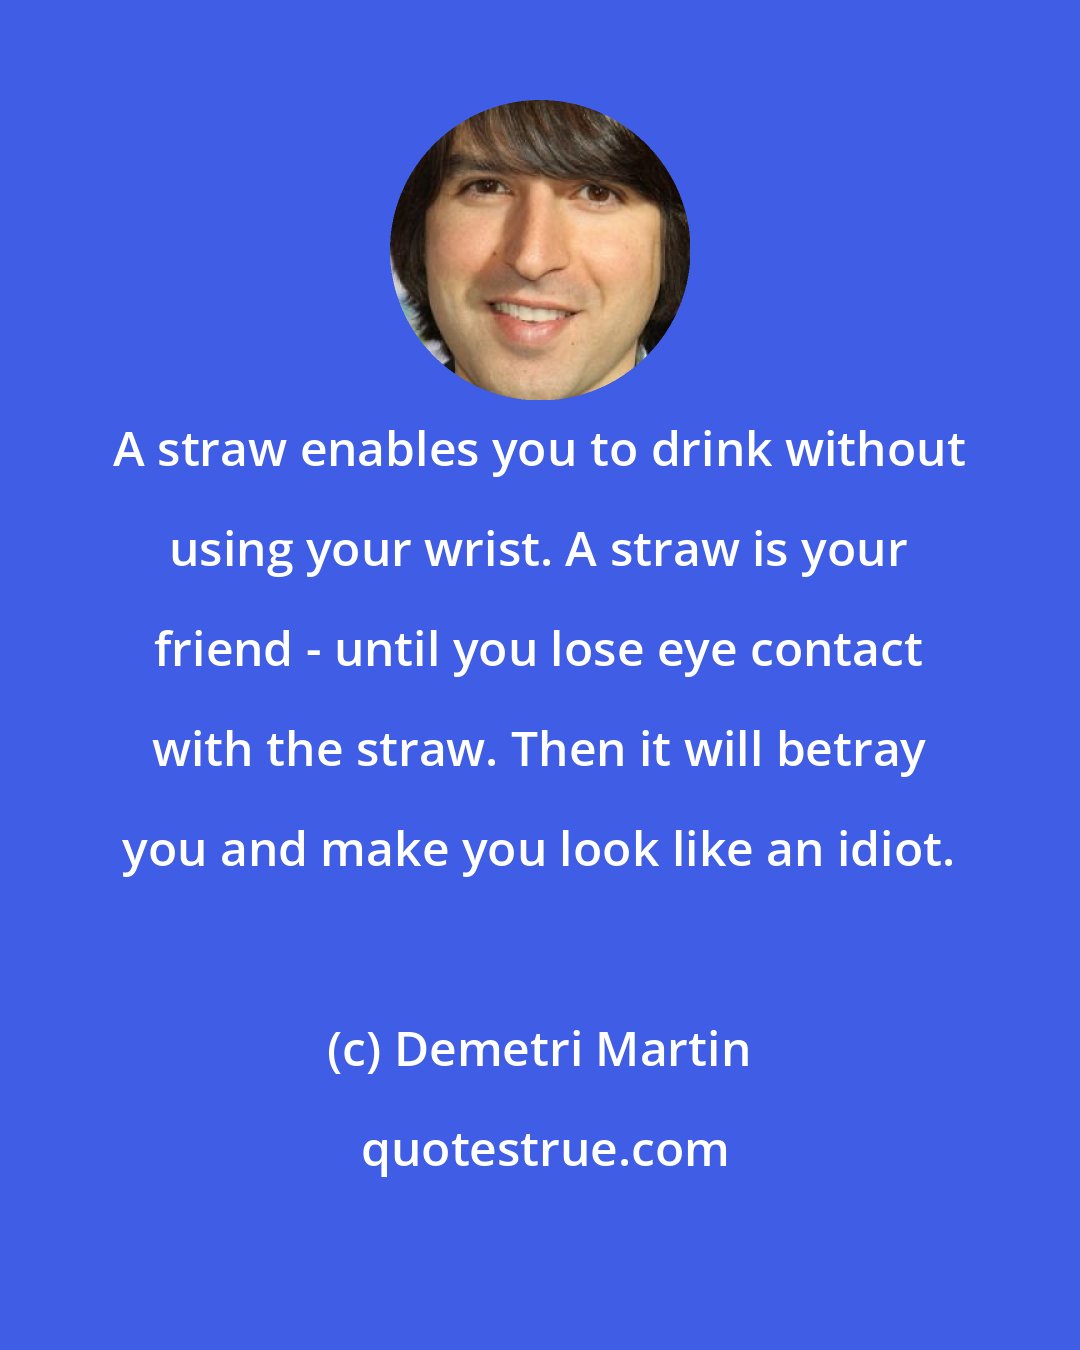 Demetri Martin: A straw enables you to drink without using your wrist. A straw is your friend - until you lose eye contact with the straw. Then it will betray you and make you look like an idiot.